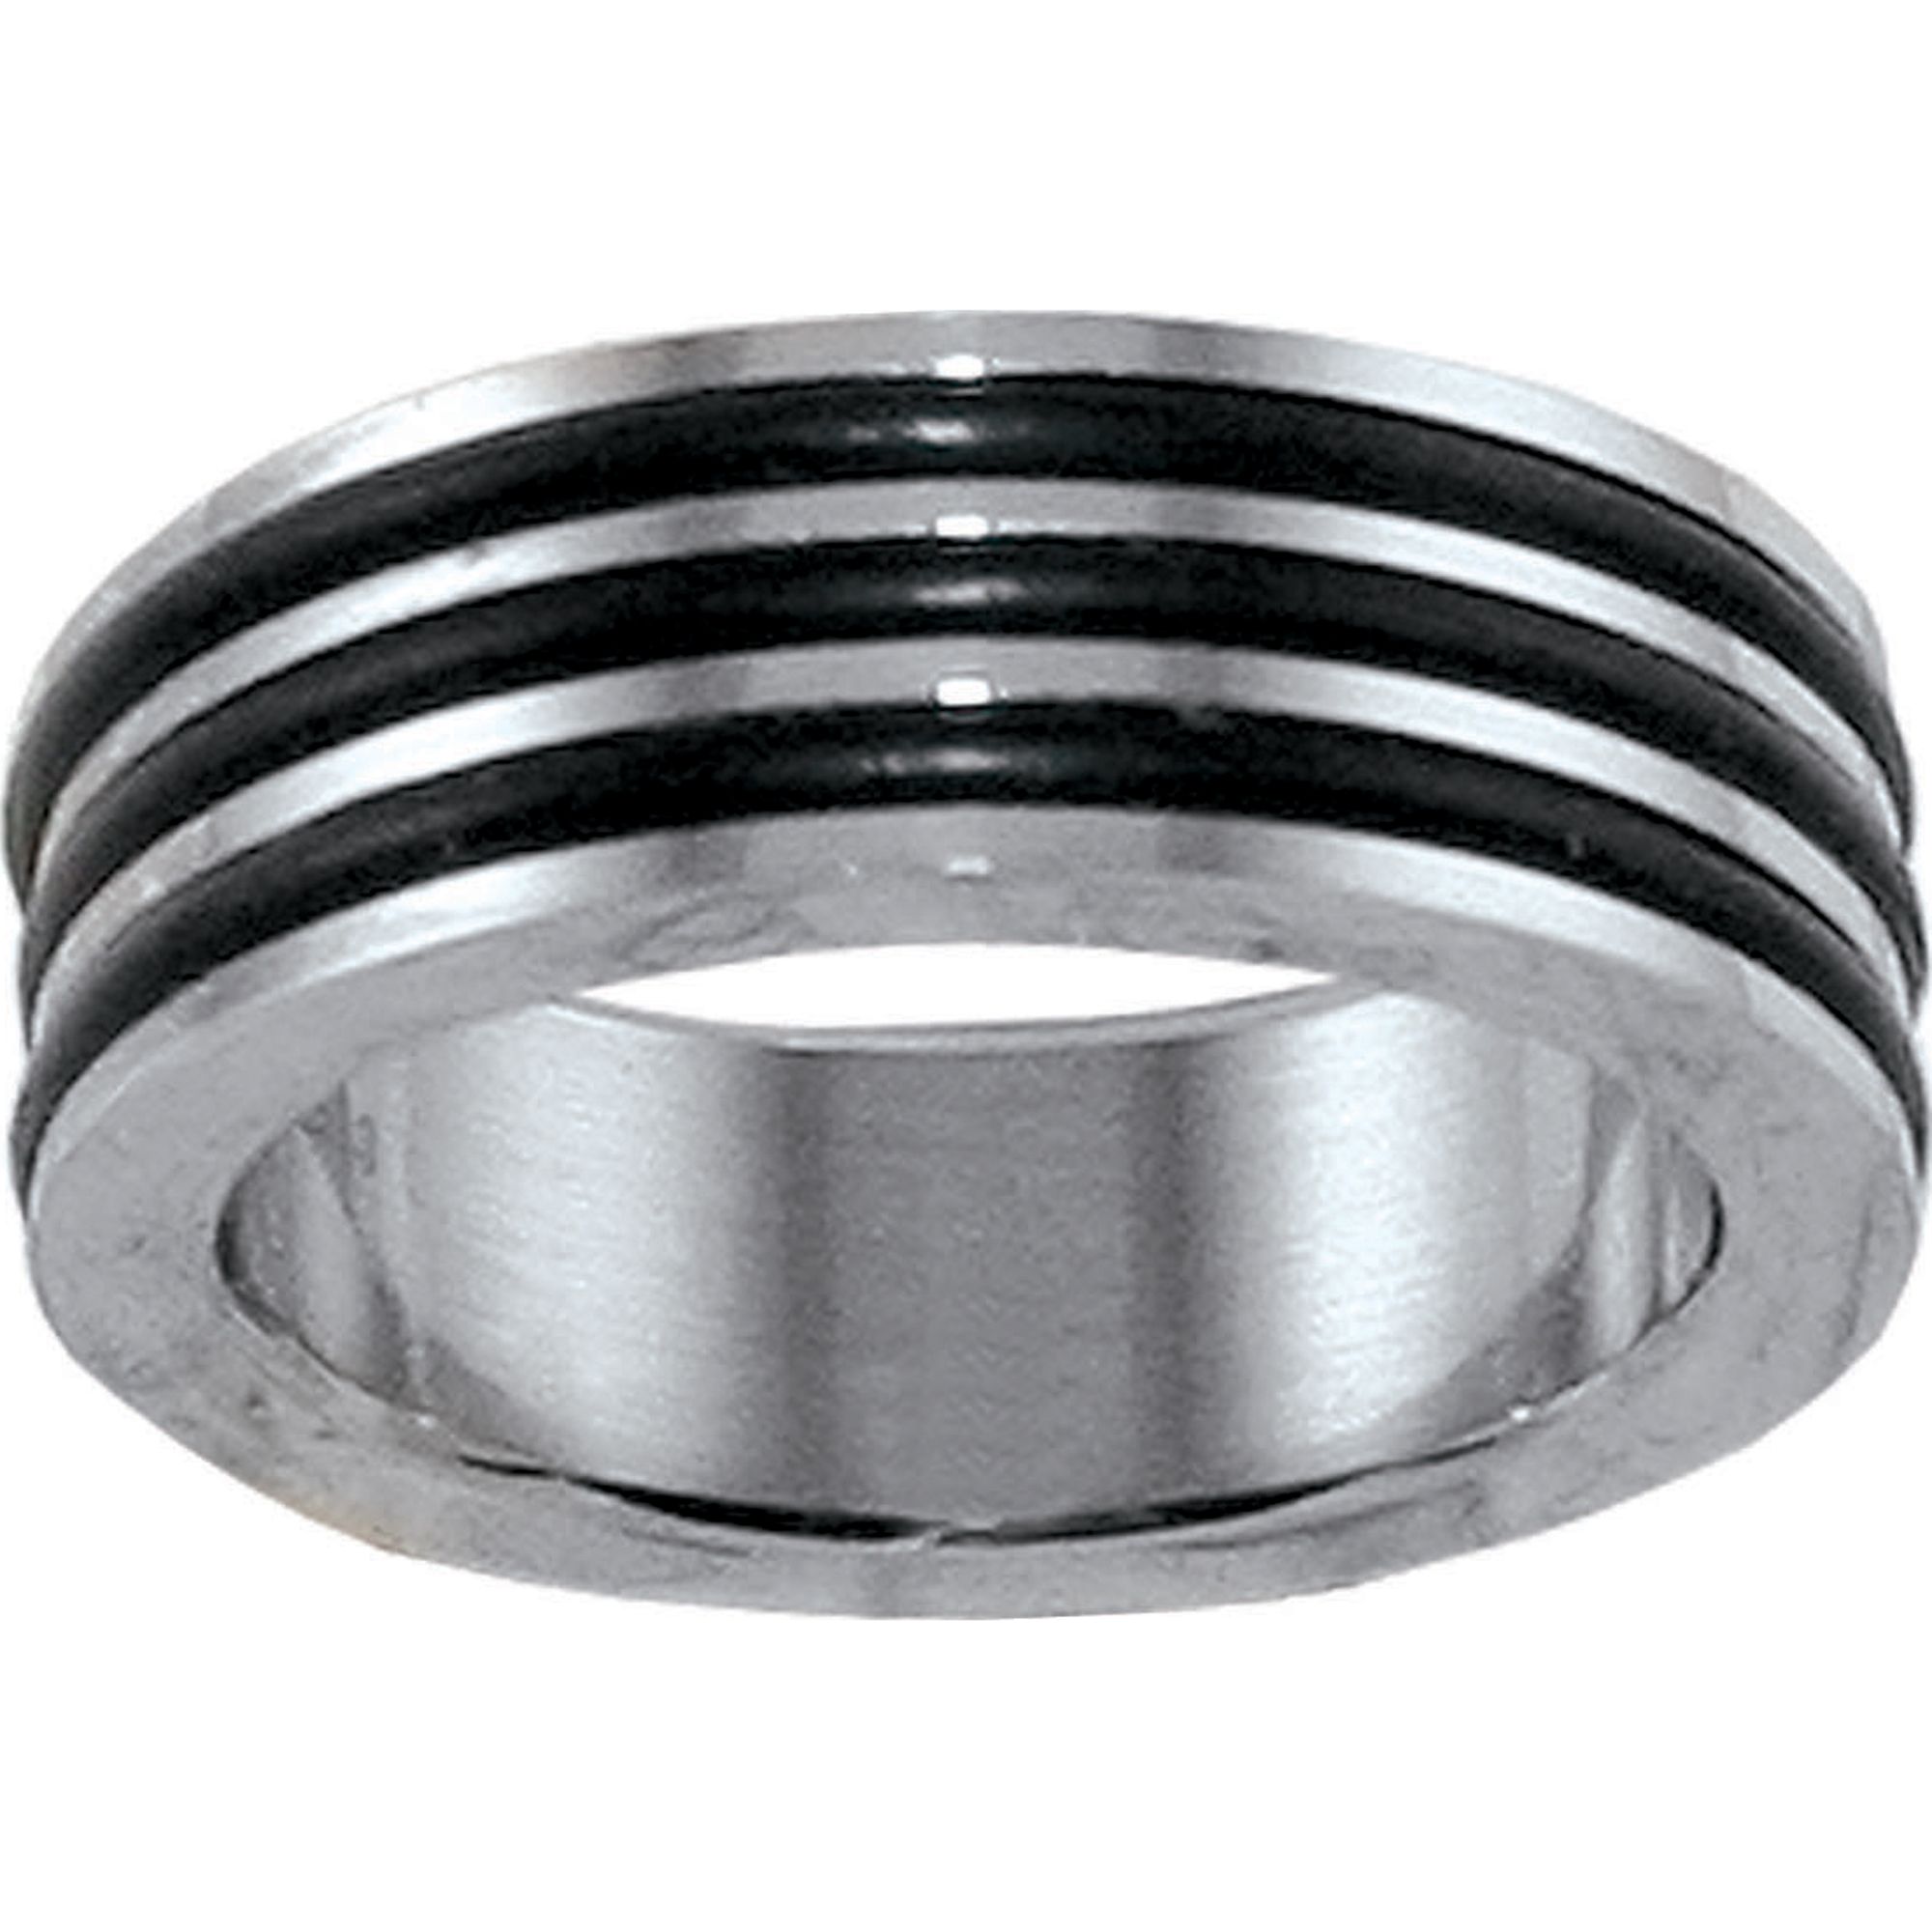 Mens Stainless Steel and Rubber Ring